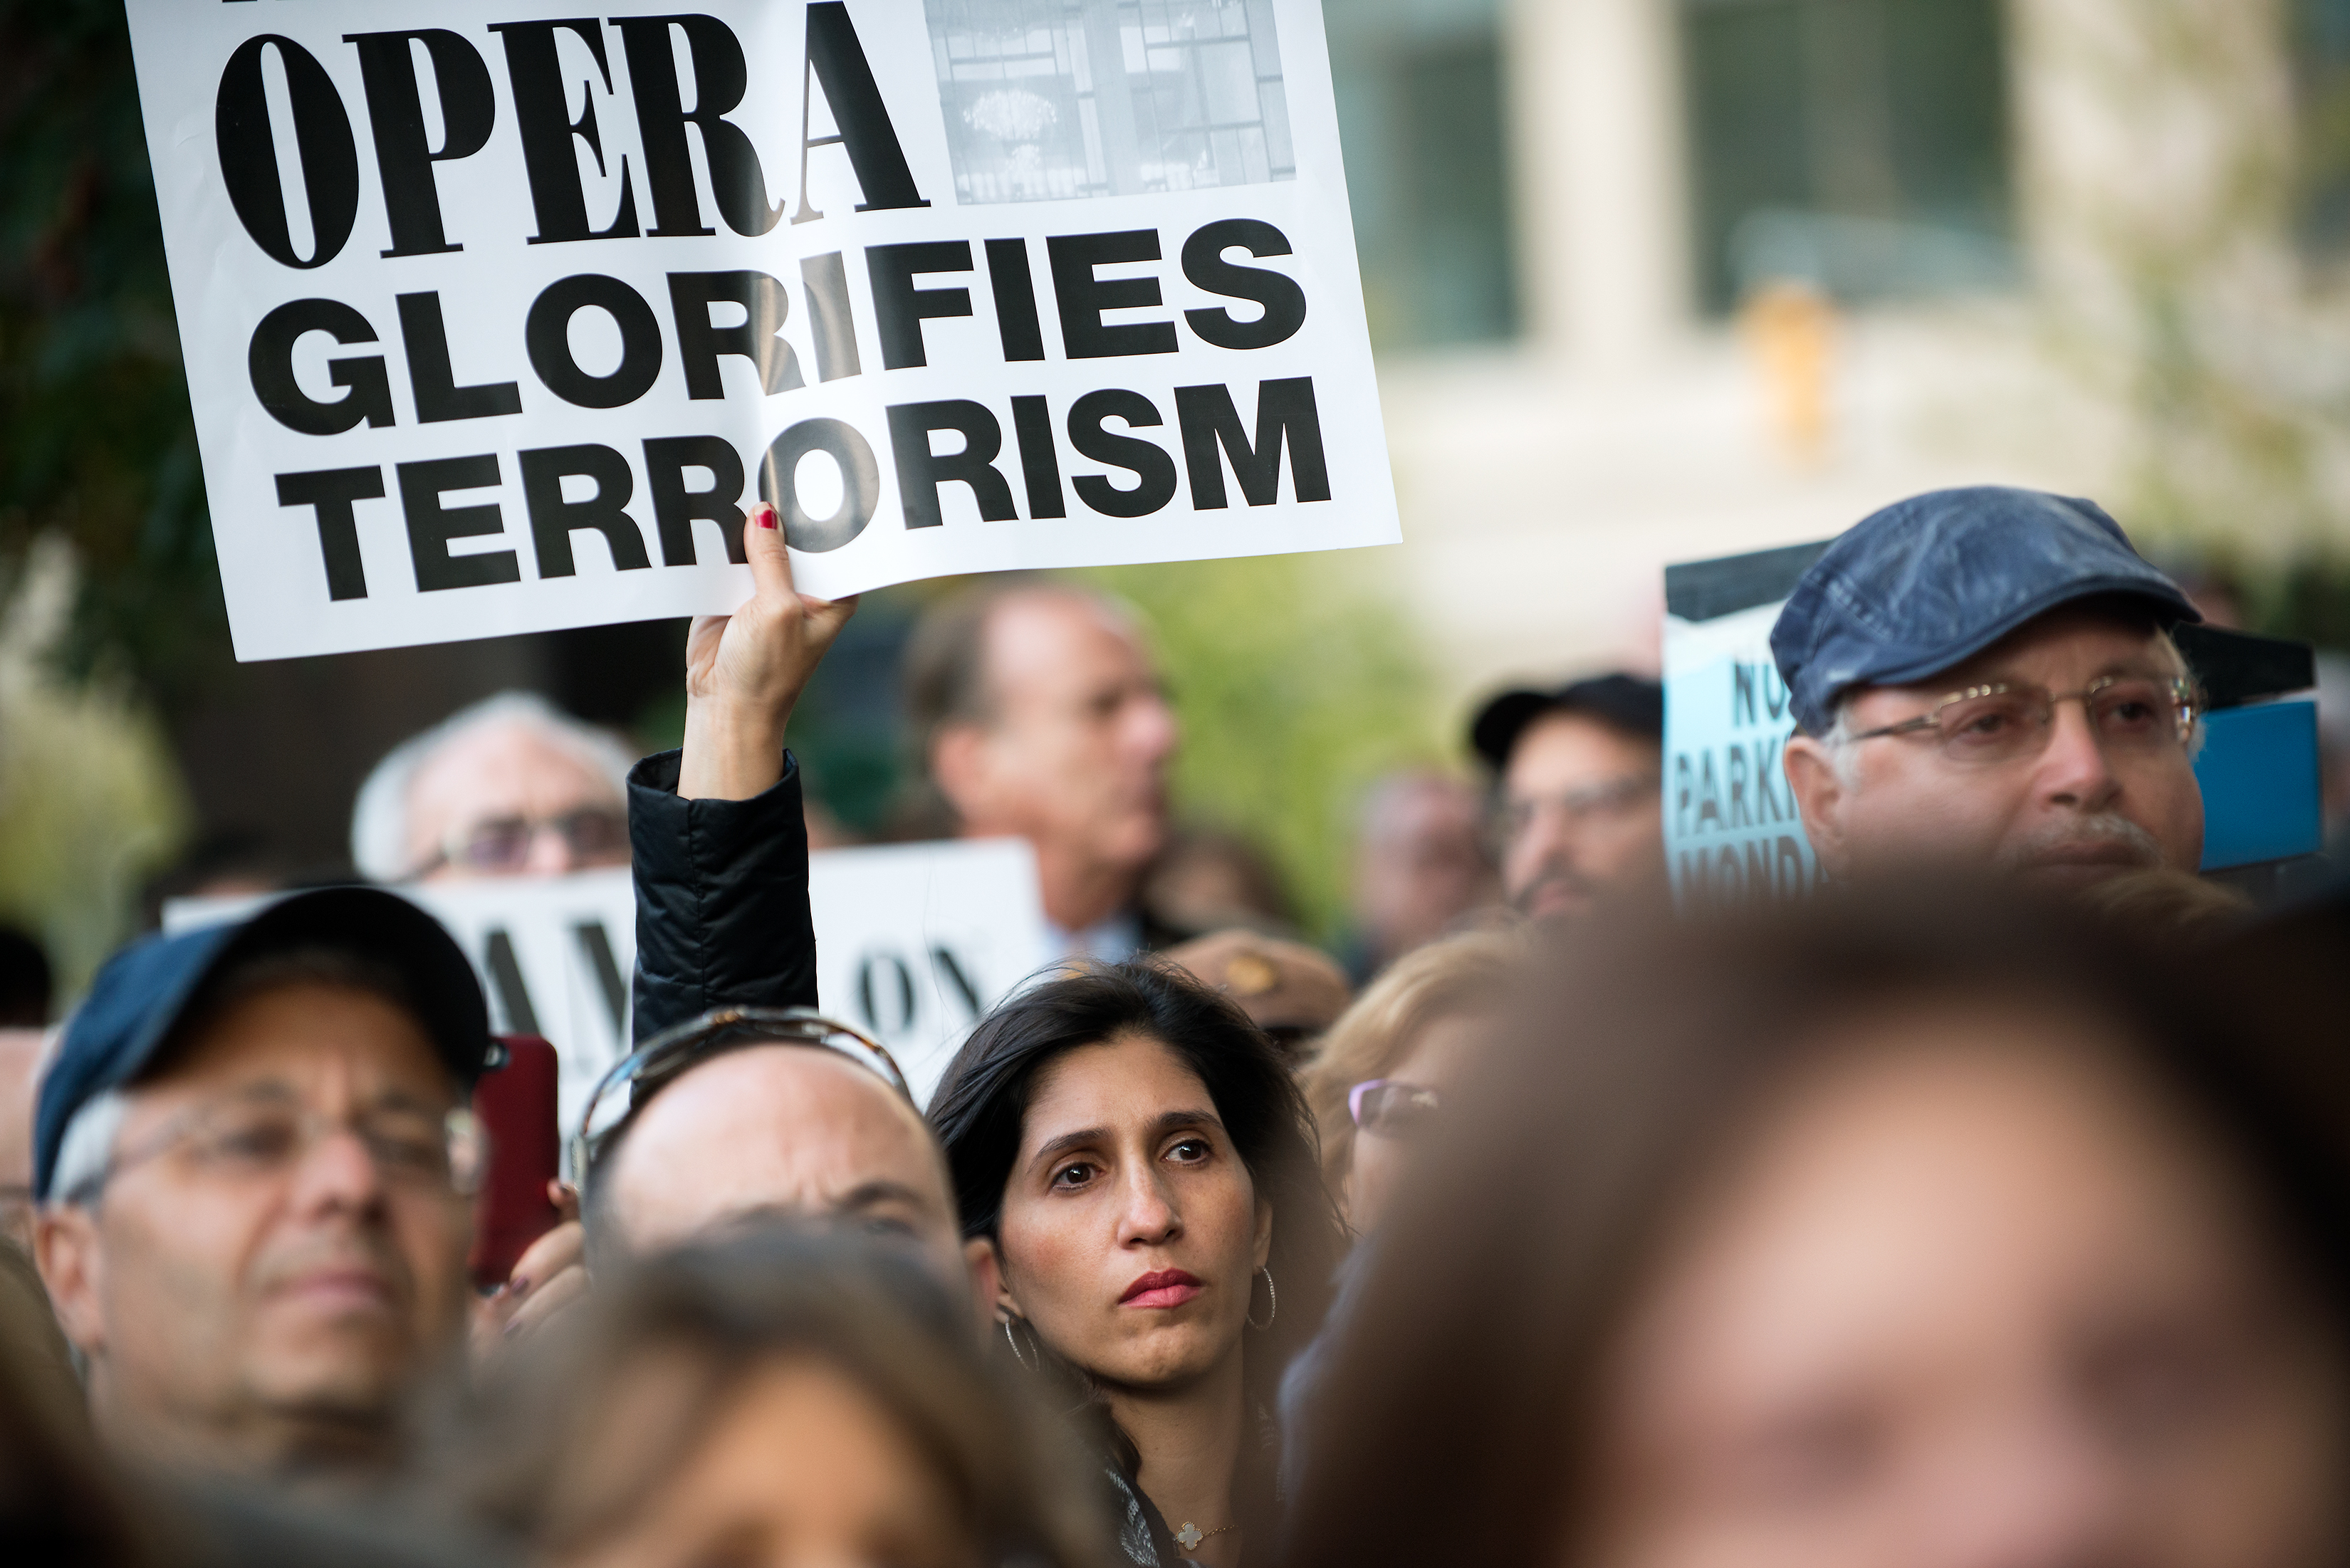 A protestor holds up a sign outside the Metropolitan Opera at Lincoln Center on opening night of the opera, "The Death of Klinghoffer" on October 20, 2014 in New York City. The opera, by John Adams, depicts the death of Leon Klinghoffer, a Jewish cruise passenger from New York, who was killed and dumped overboard during a 1985 hijacking of an Italian cruise ship by Palestinian terrorists. (Bryan Thomas&mdash;Getty Images)